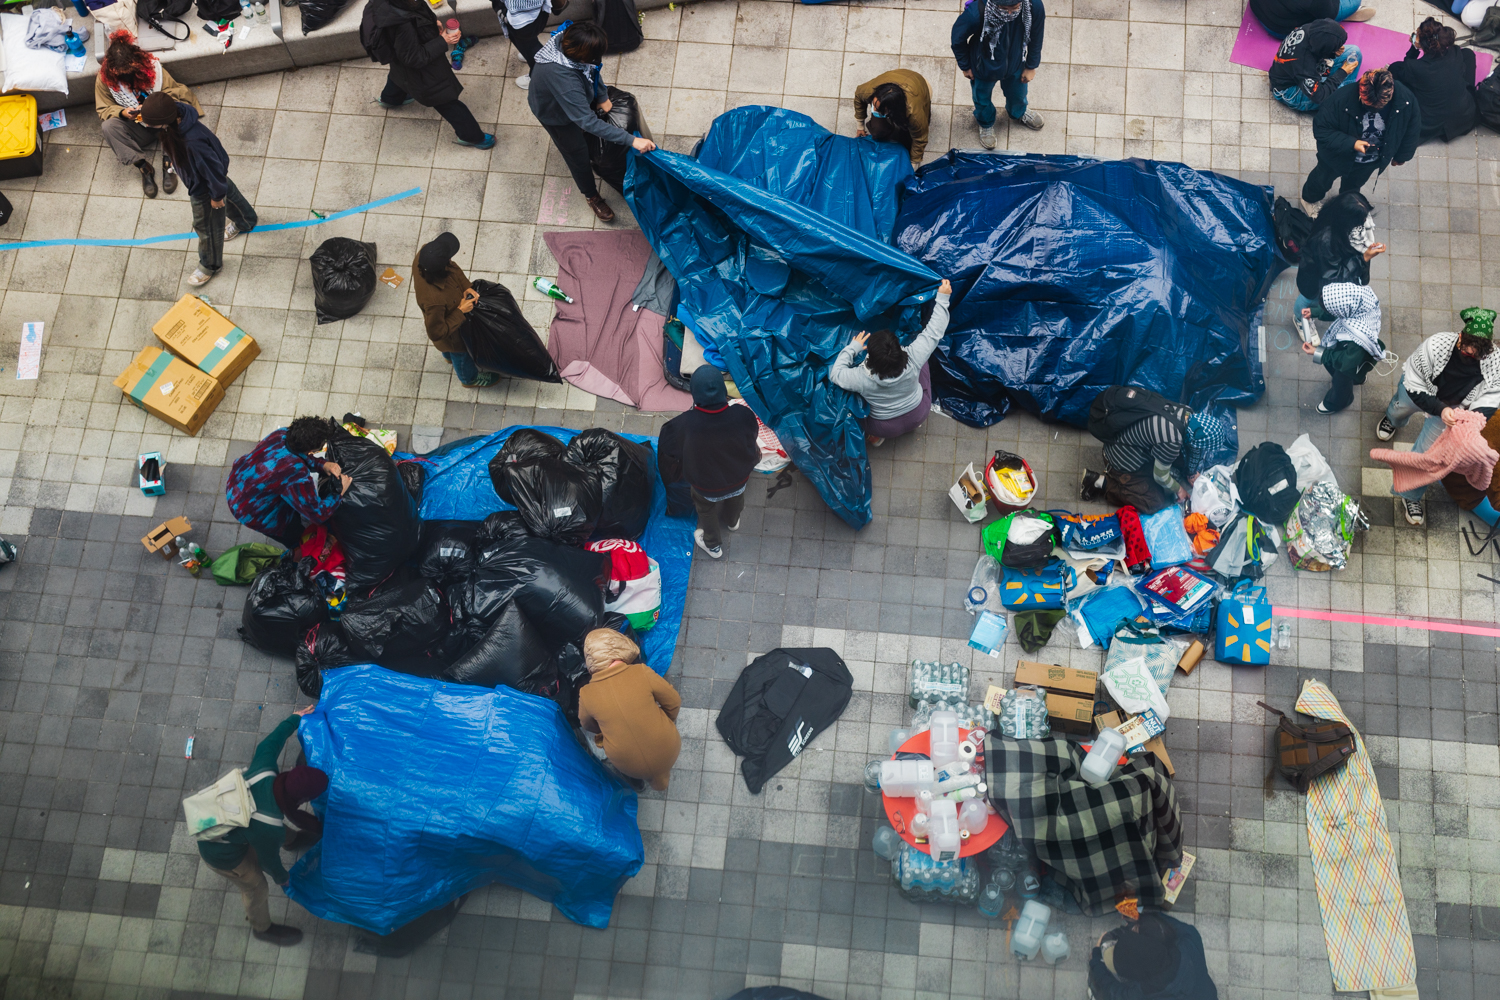 Aerial view of protestors putting up blue tarps over supplies inside the encampment.